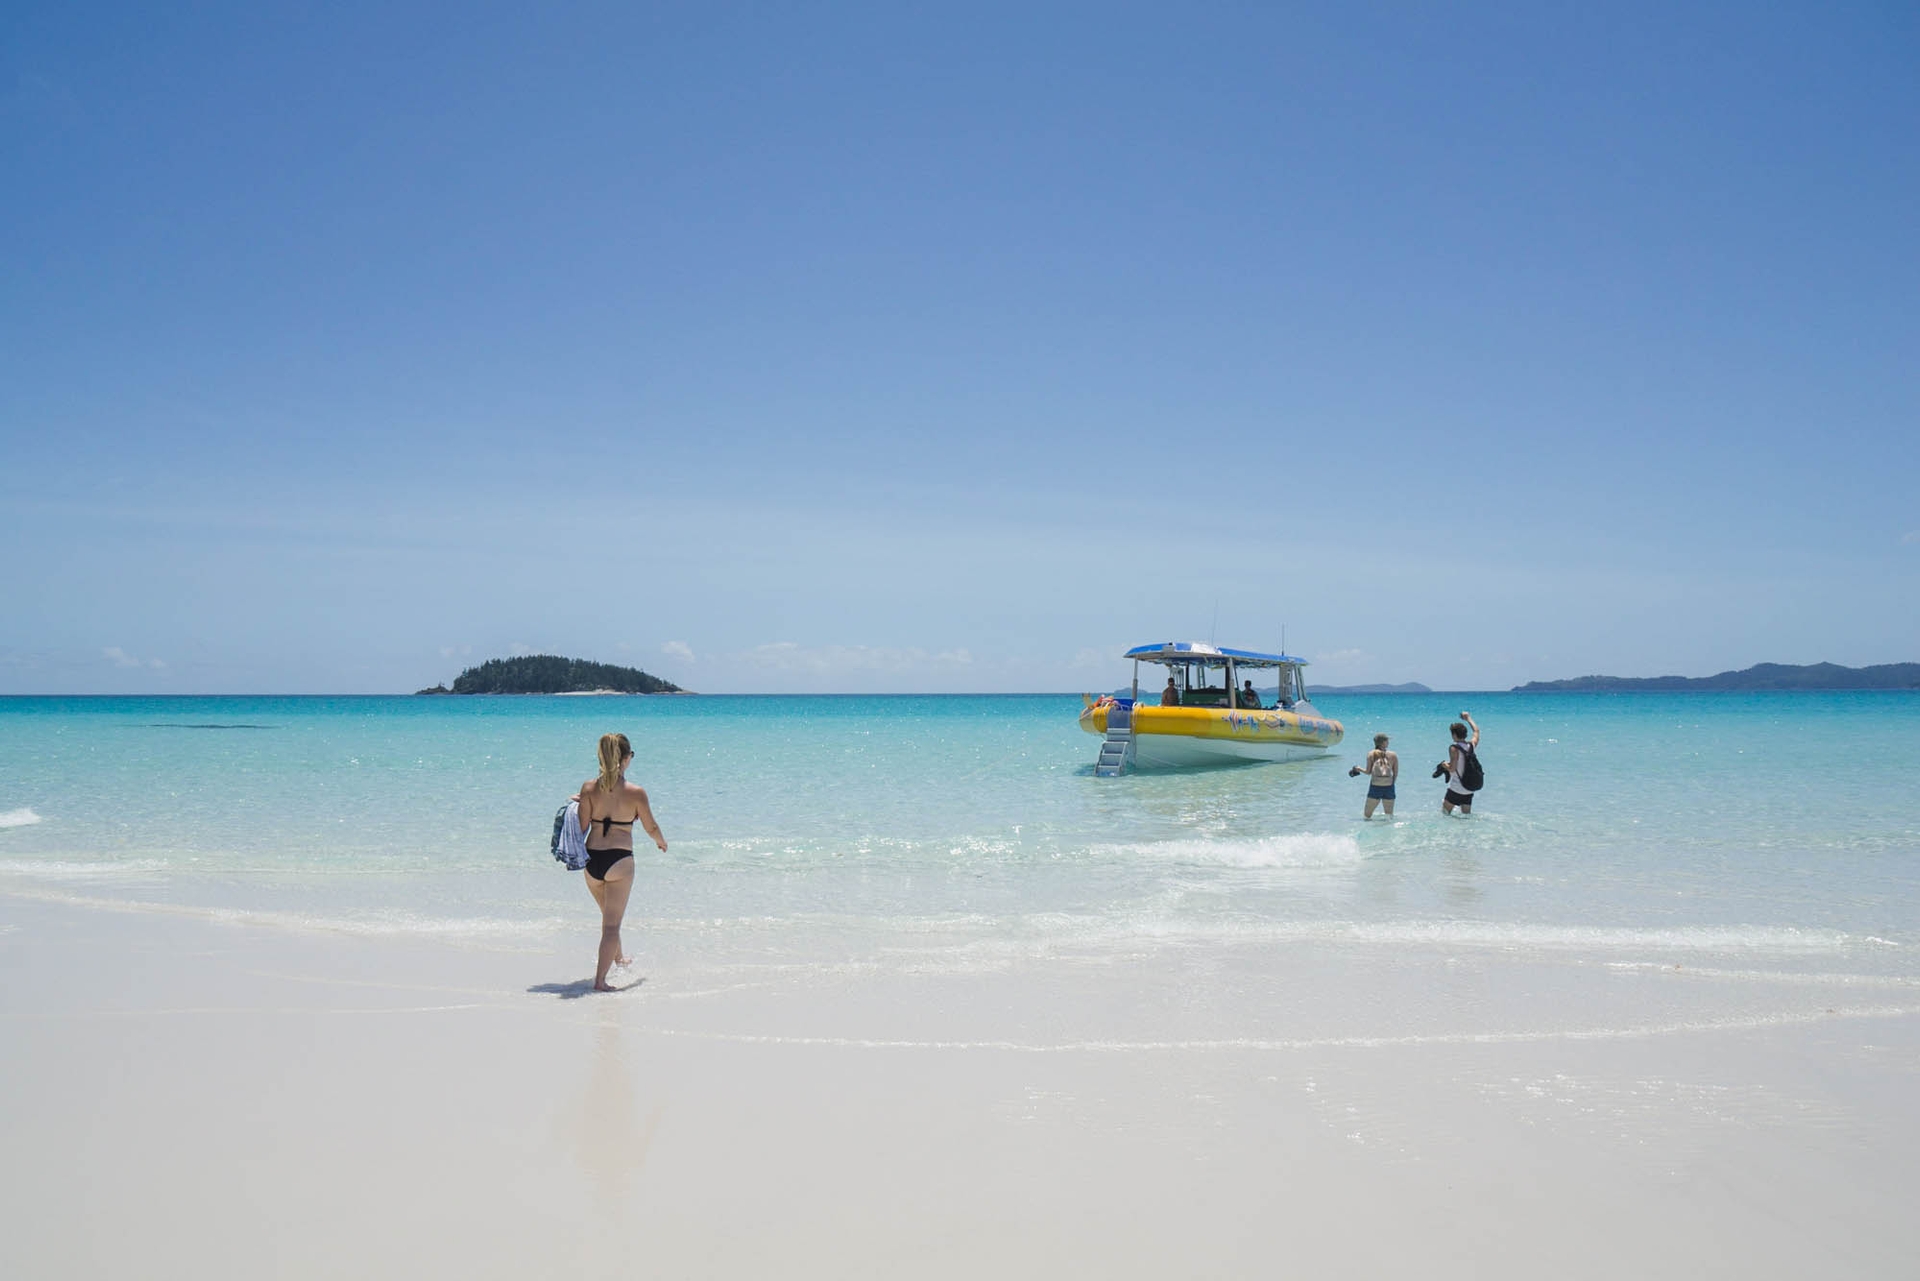 Jami walking on a beach towards our boat in Whitsunday Islands National Park in Queensland, Australia